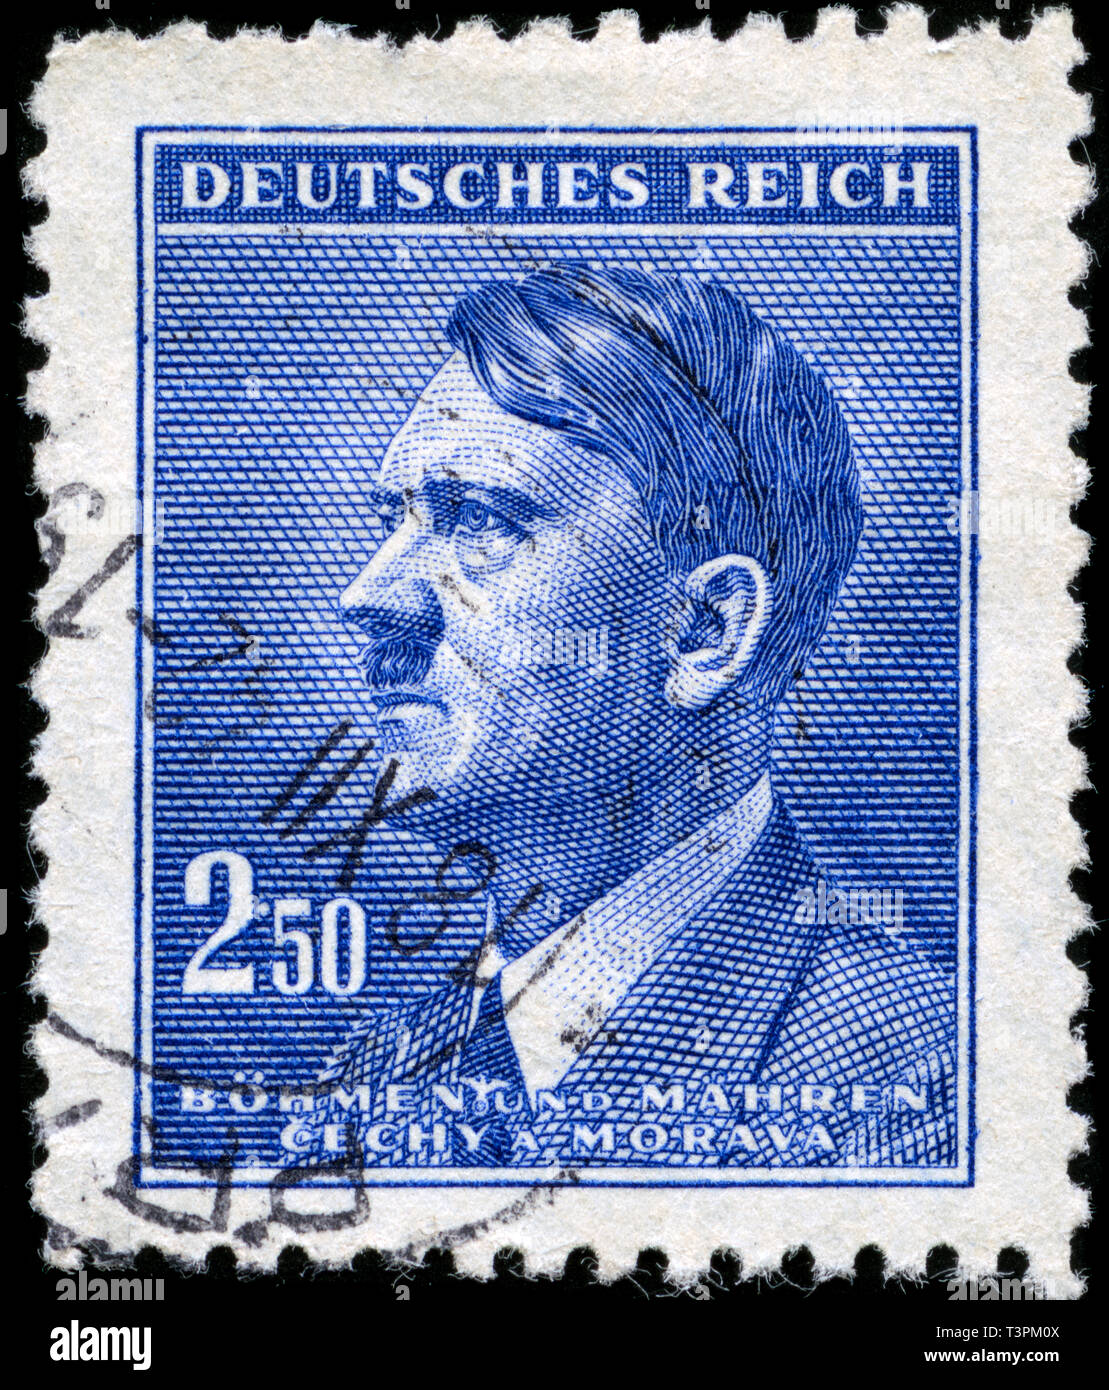 Postage stamp from Bohemia and Moravia in the Adolf Hitler series issued in 1942 Stock Photo